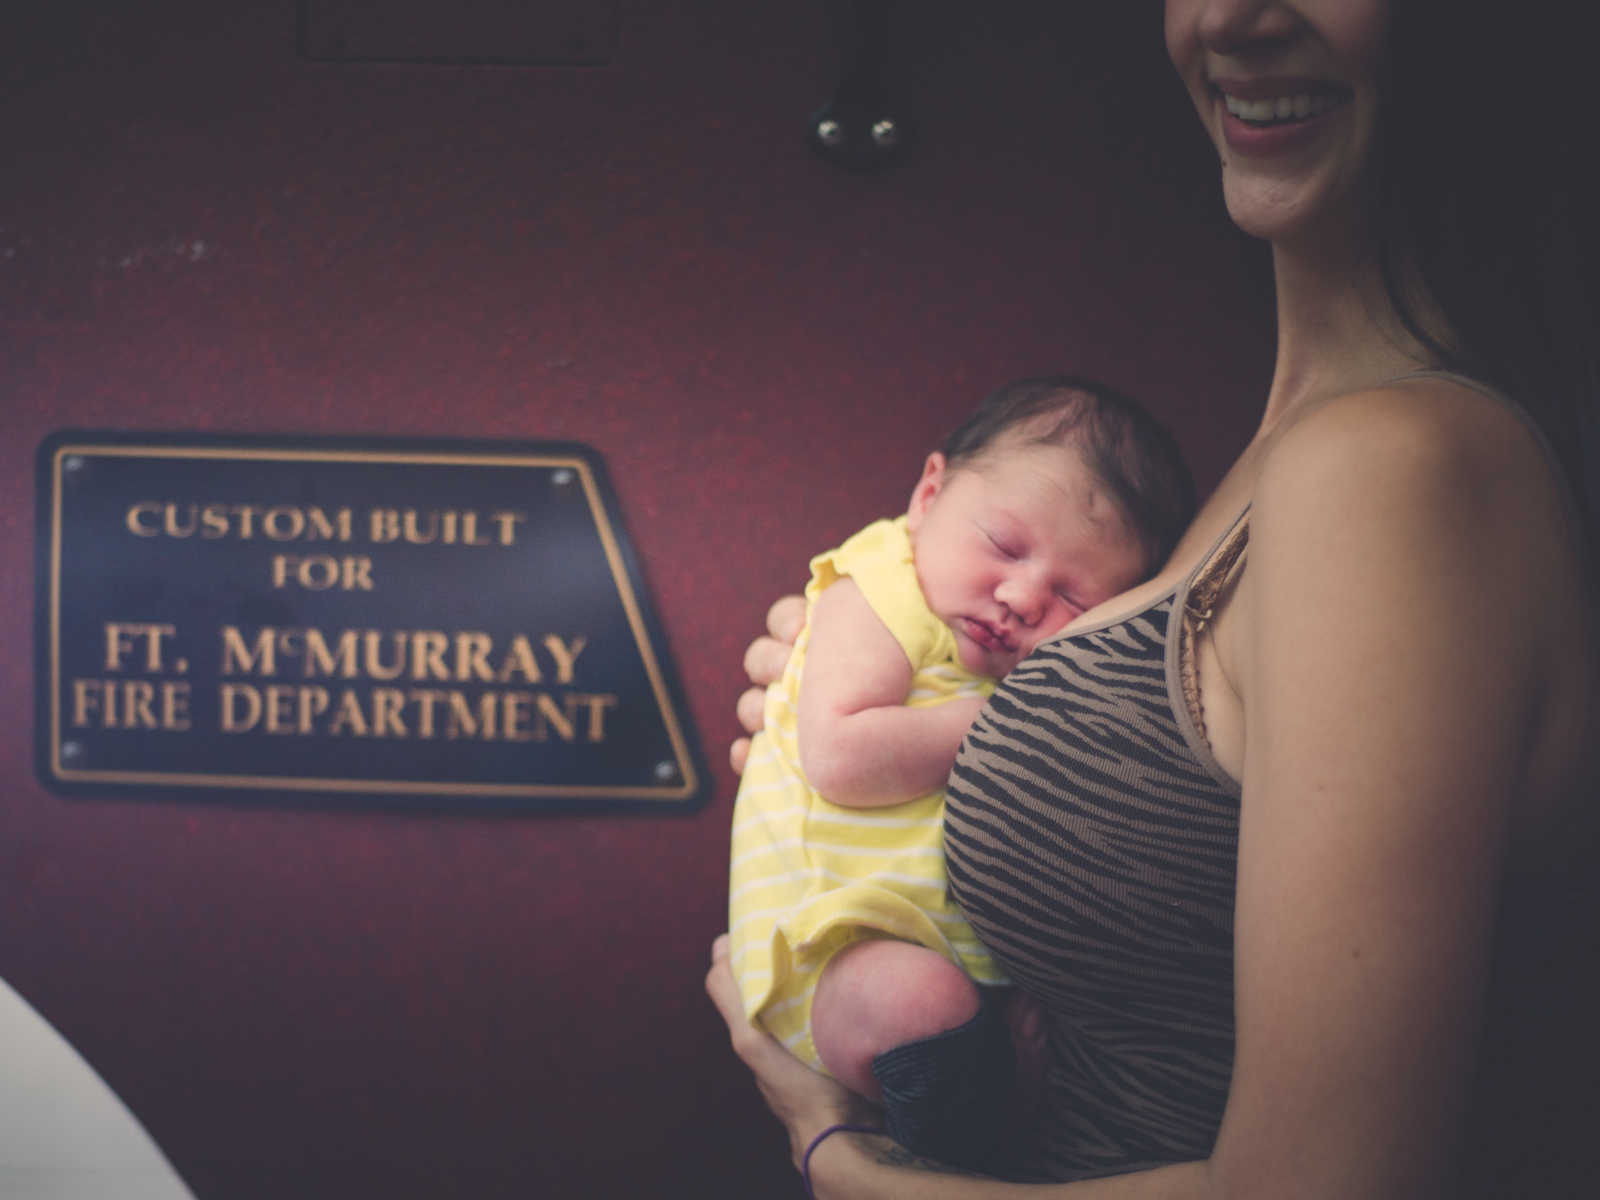 Close up of newborn of fire fighter being held in mother's arms next to sign saying, "Ft. McMurray Fire Department"